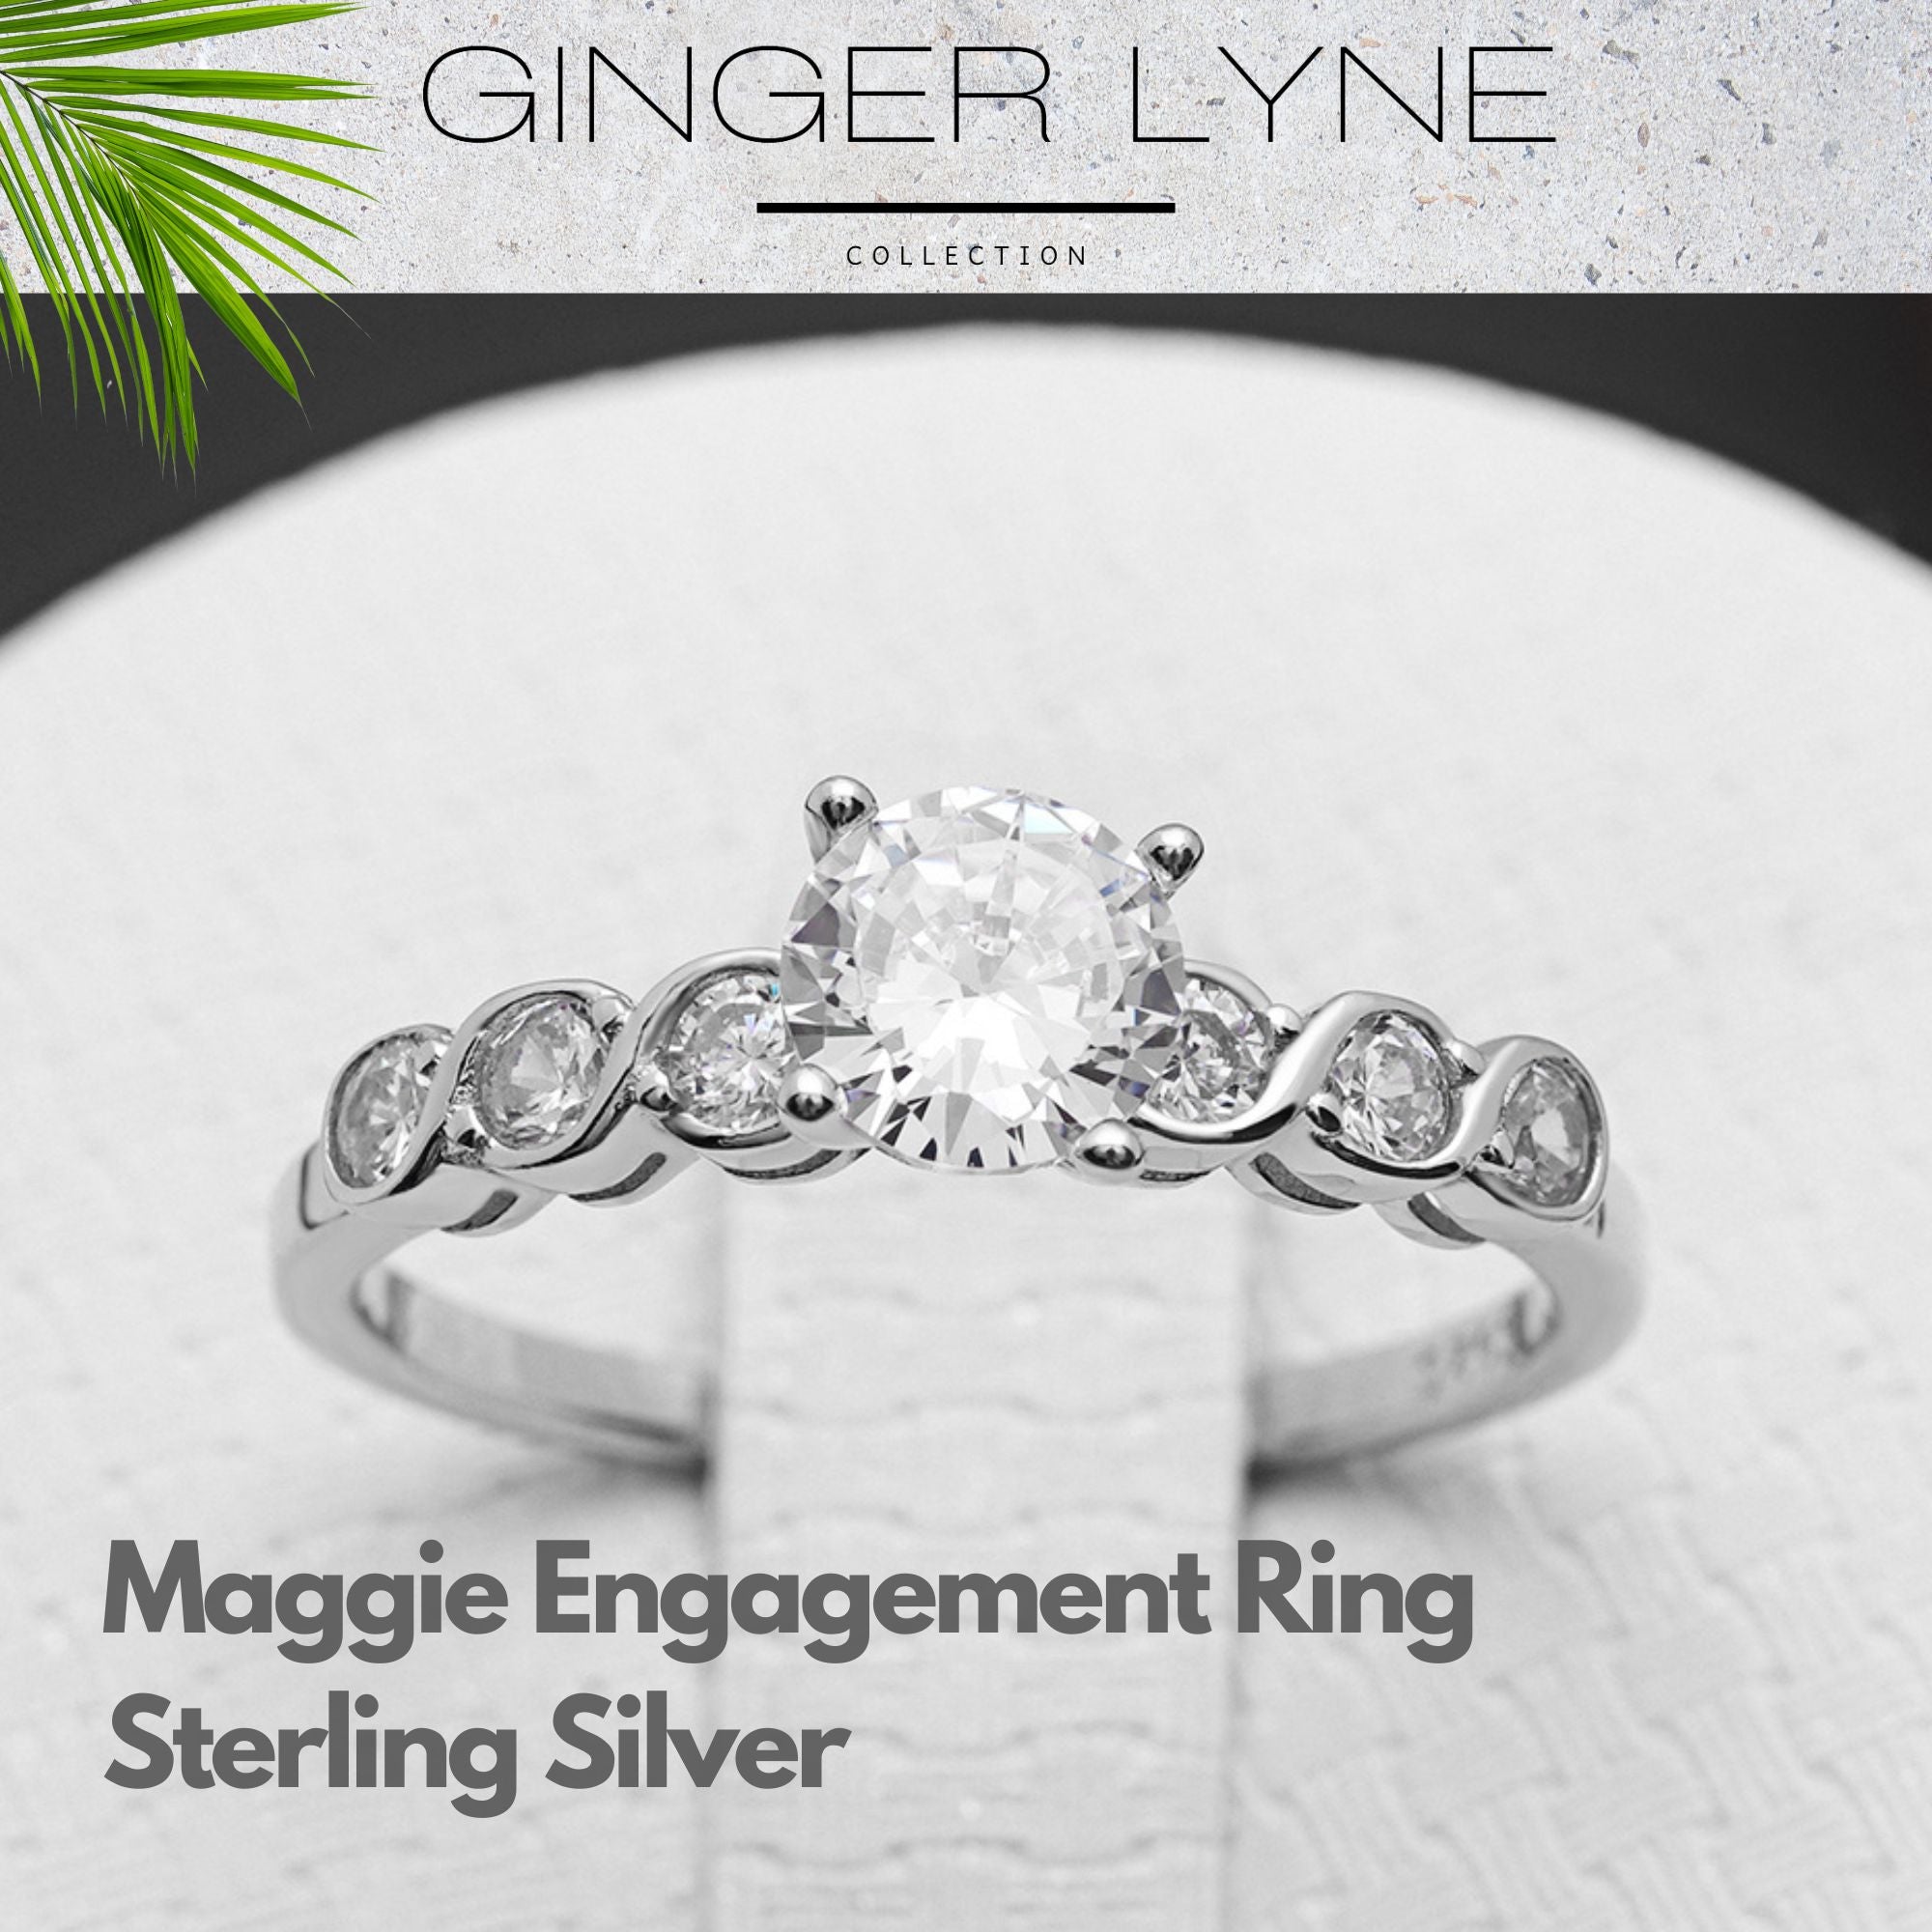 1.5 Ct Solitaire Engagement Ring for Women Sterling Silver Wedding Ring for Her Cz Ginger Lyne - 6